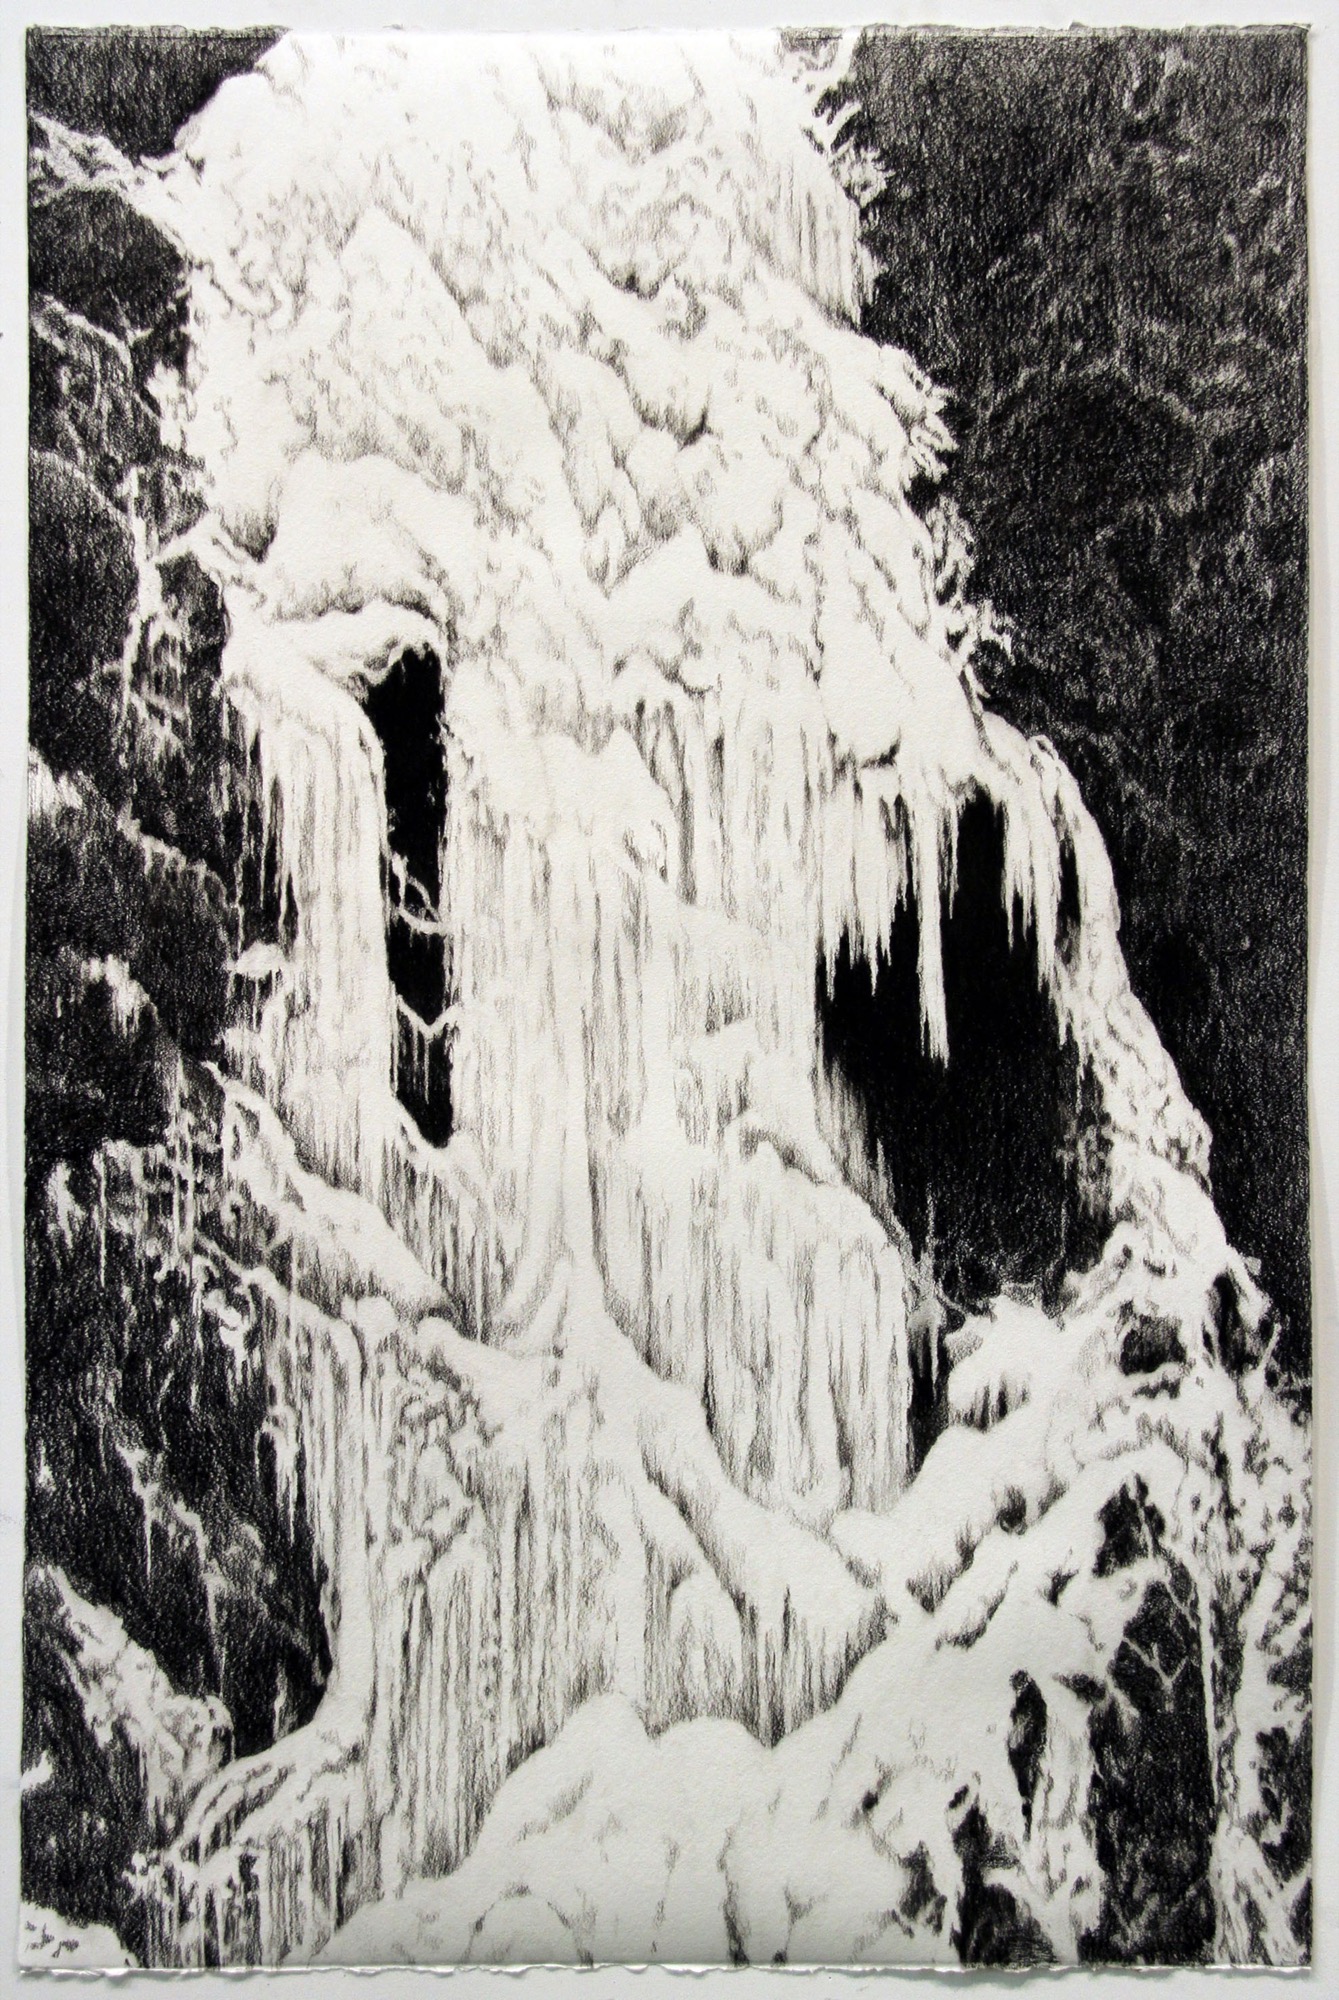 Andrew Browne, Frozen 2018, Charcoal on paper, 80.2 x 121 cm, courtesy the artist and Tolarno Galleries.